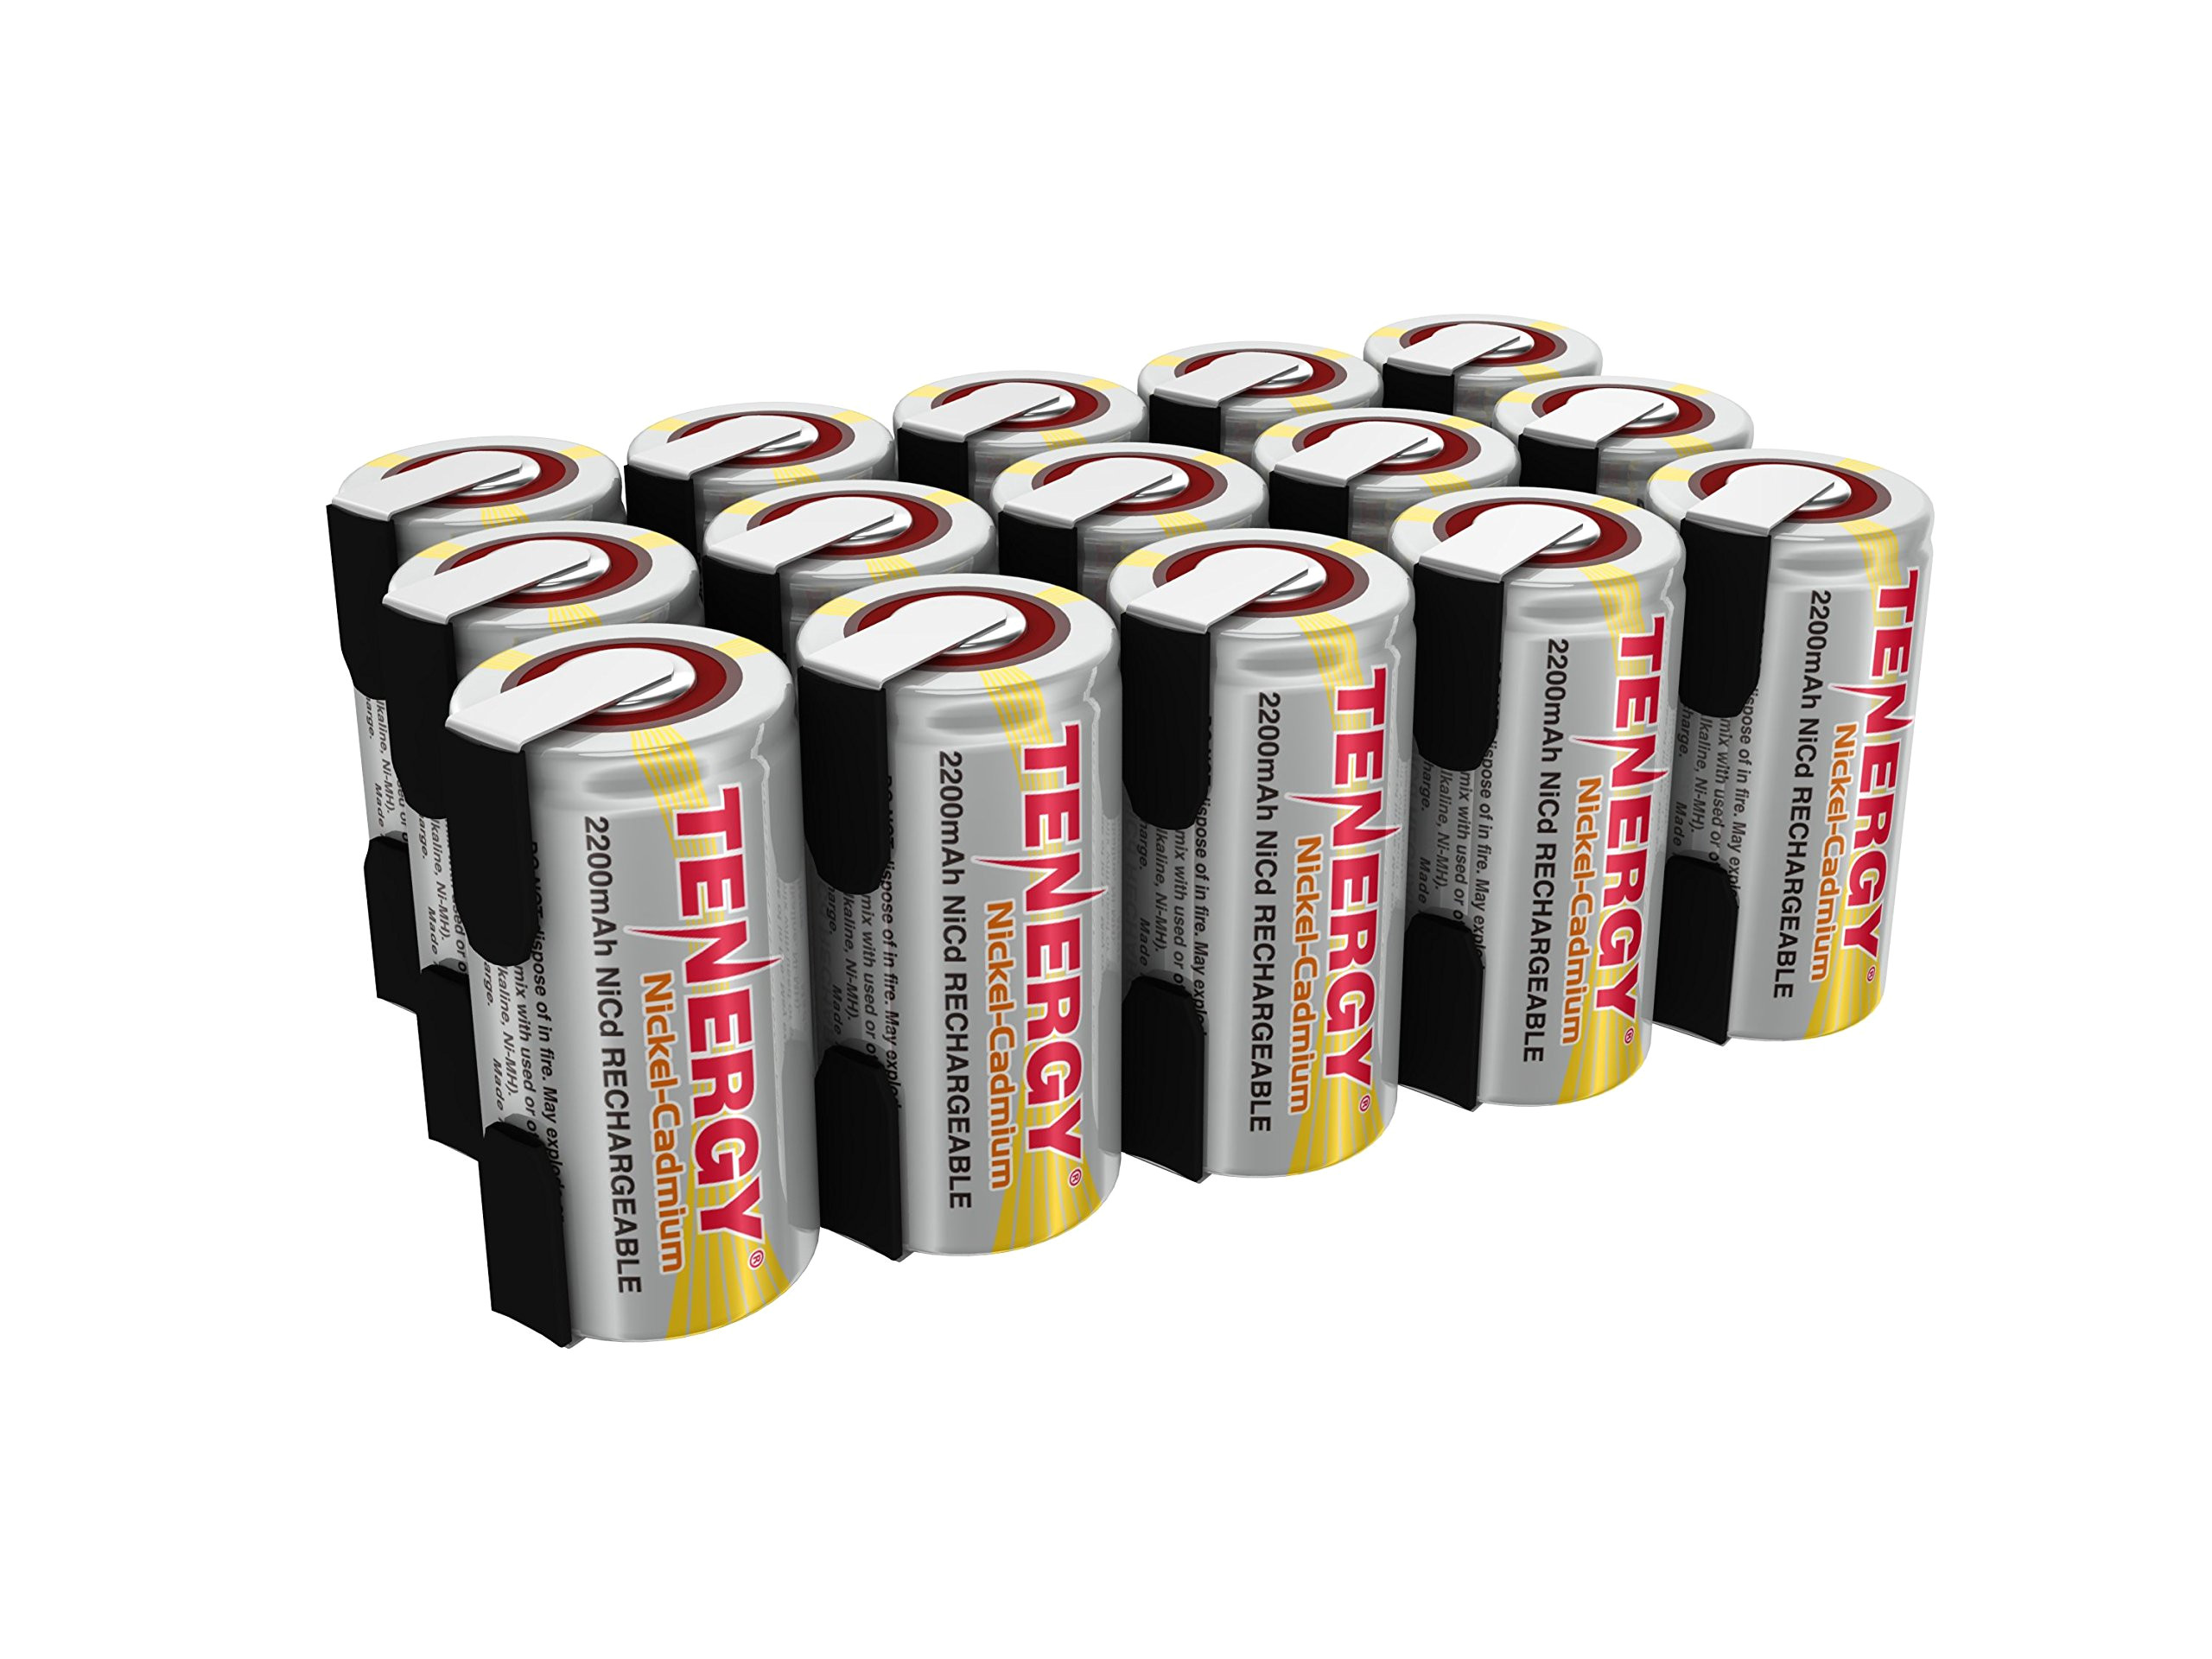 tenergy 2200mah sub c nicd battery for power tools 1 2v flat top rechargeable sub